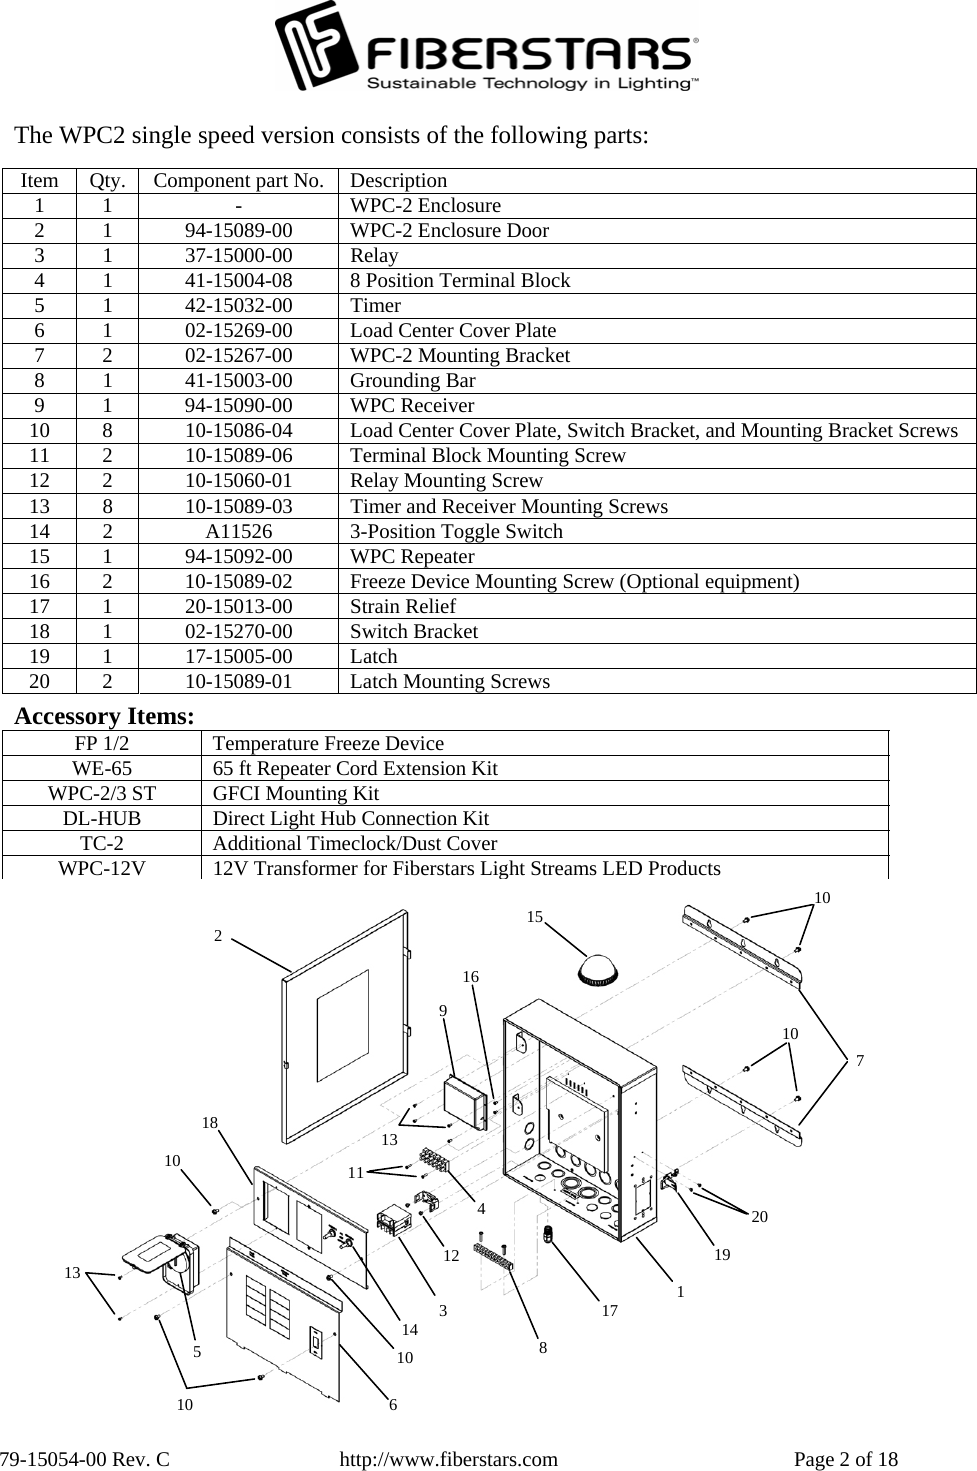  79-15054-00 Rev. C  http://www.fiberstars.com  Page 2 of 18 The WPC2 single speed version consists of the following parts:  Item  Qty.  Component part No.  Description 1 1  -  WPC-2 Enclosure 2 1  94-15089-00 WPC-2 Enclosure Door 3 1  37-15000-00 Relay 4  1  41-15004-08  8 Position Terminal Block 5 1  42-15032-00 Timer 6  1  02-15269-00  Load Center Cover Plate 7  2  02-15267-00  WPC-2 Mounting Bracket 8 1  41-15003-00 Grounding Bar 9 1  94-15090-00 WPC Receiver 10  8  10-15086-04  Load Center Cover Plate, Switch Bracket, and Mounting Bracket Screws 11  2  10-15089-06  Terminal Block Mounting Screw 12  2  10-15060-01  Relay Mounting Screw 13  8  10-15089-03  Timer and Receiver Mounting Screws 14  2  A11526  3-Position Toggle Switch 15 1  94-15092-00  WPC Repeater 16  2  10-15089-02  Freeze Device Mounting Screw (Optional equipment) 17 1  20-15013-00  Strain Relief 18 1  02-15270-00  Switch Bracket 19 1  17-15005-00  Latch 20  2  10-15089-01  Latch Mounting Screws  Accessory Items: FP 1/2  Temperature Freeze Device WE-65  65 ft Repeater Cord Extension Kit WPC-2/3 ST  GFCI Mounting Kit DL-HUB  Direct Light Hub Connection Kit TC-2  Additional Timeclock/Dust Cover WPC-12V  12V Transformer for Fiberstars Light Streams LED Products17161510 18  1313 1110 10 9 8 10 7 5 3 126 14104 2 1 1920 